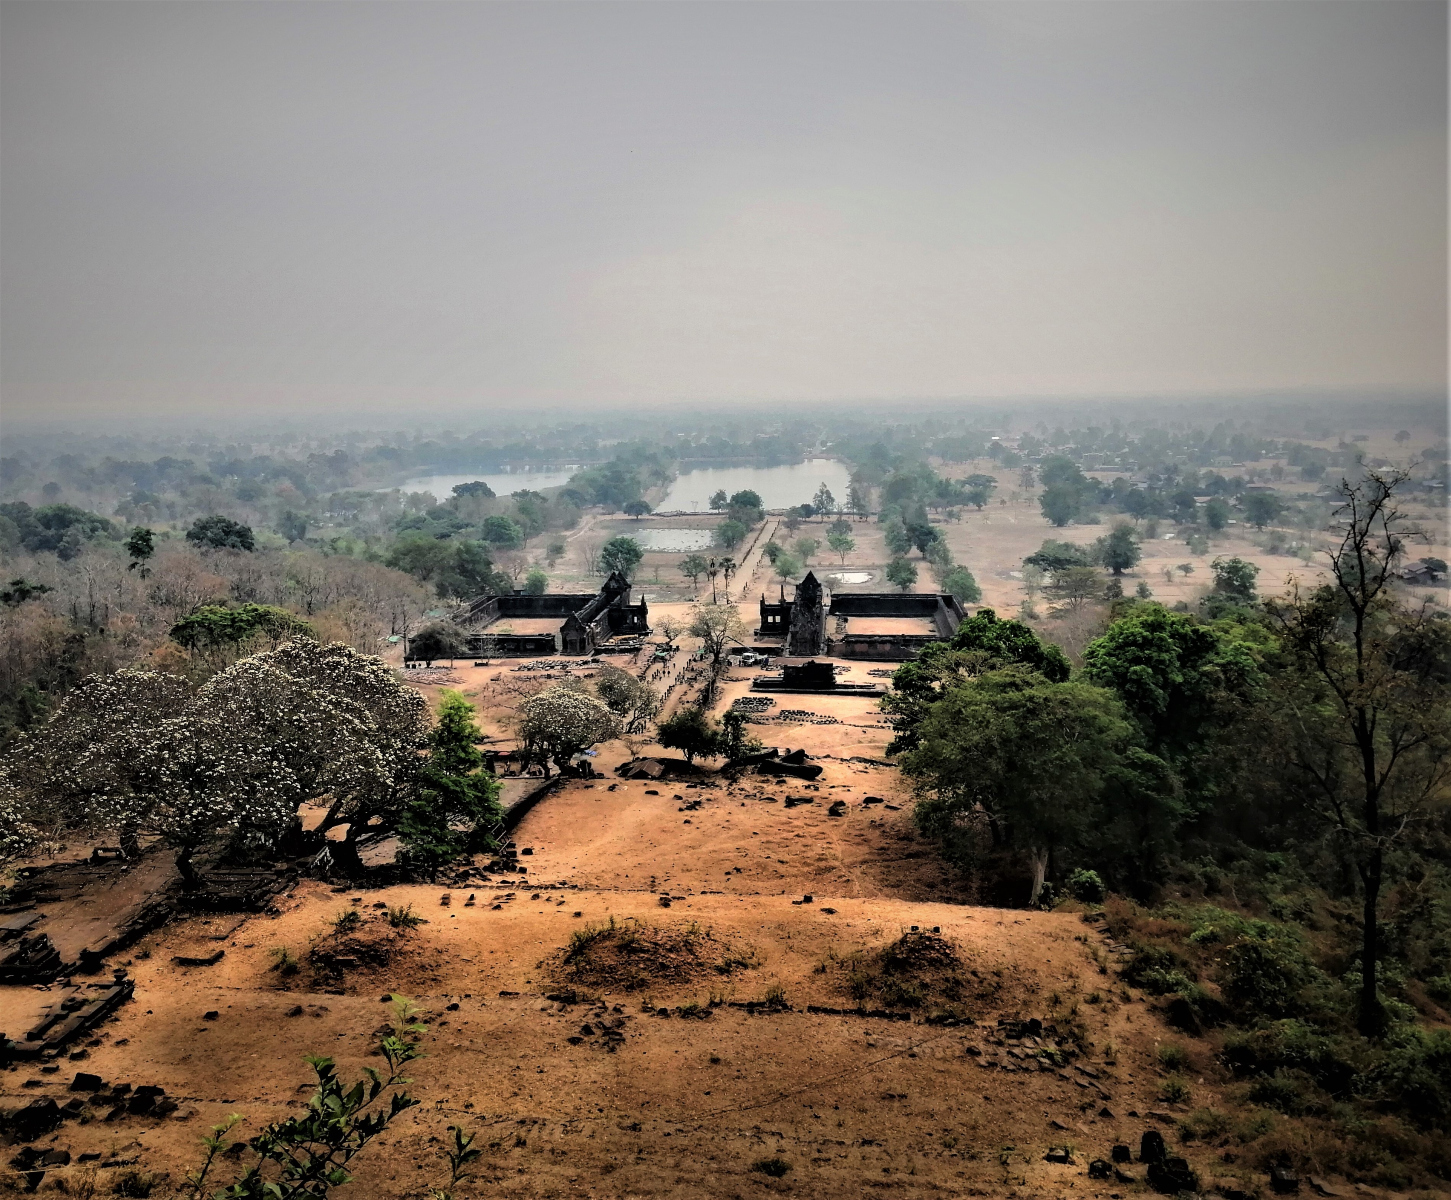 The view from above the UNESCO World Heritage Site of Vat Phu in Champasak, southern Laos.